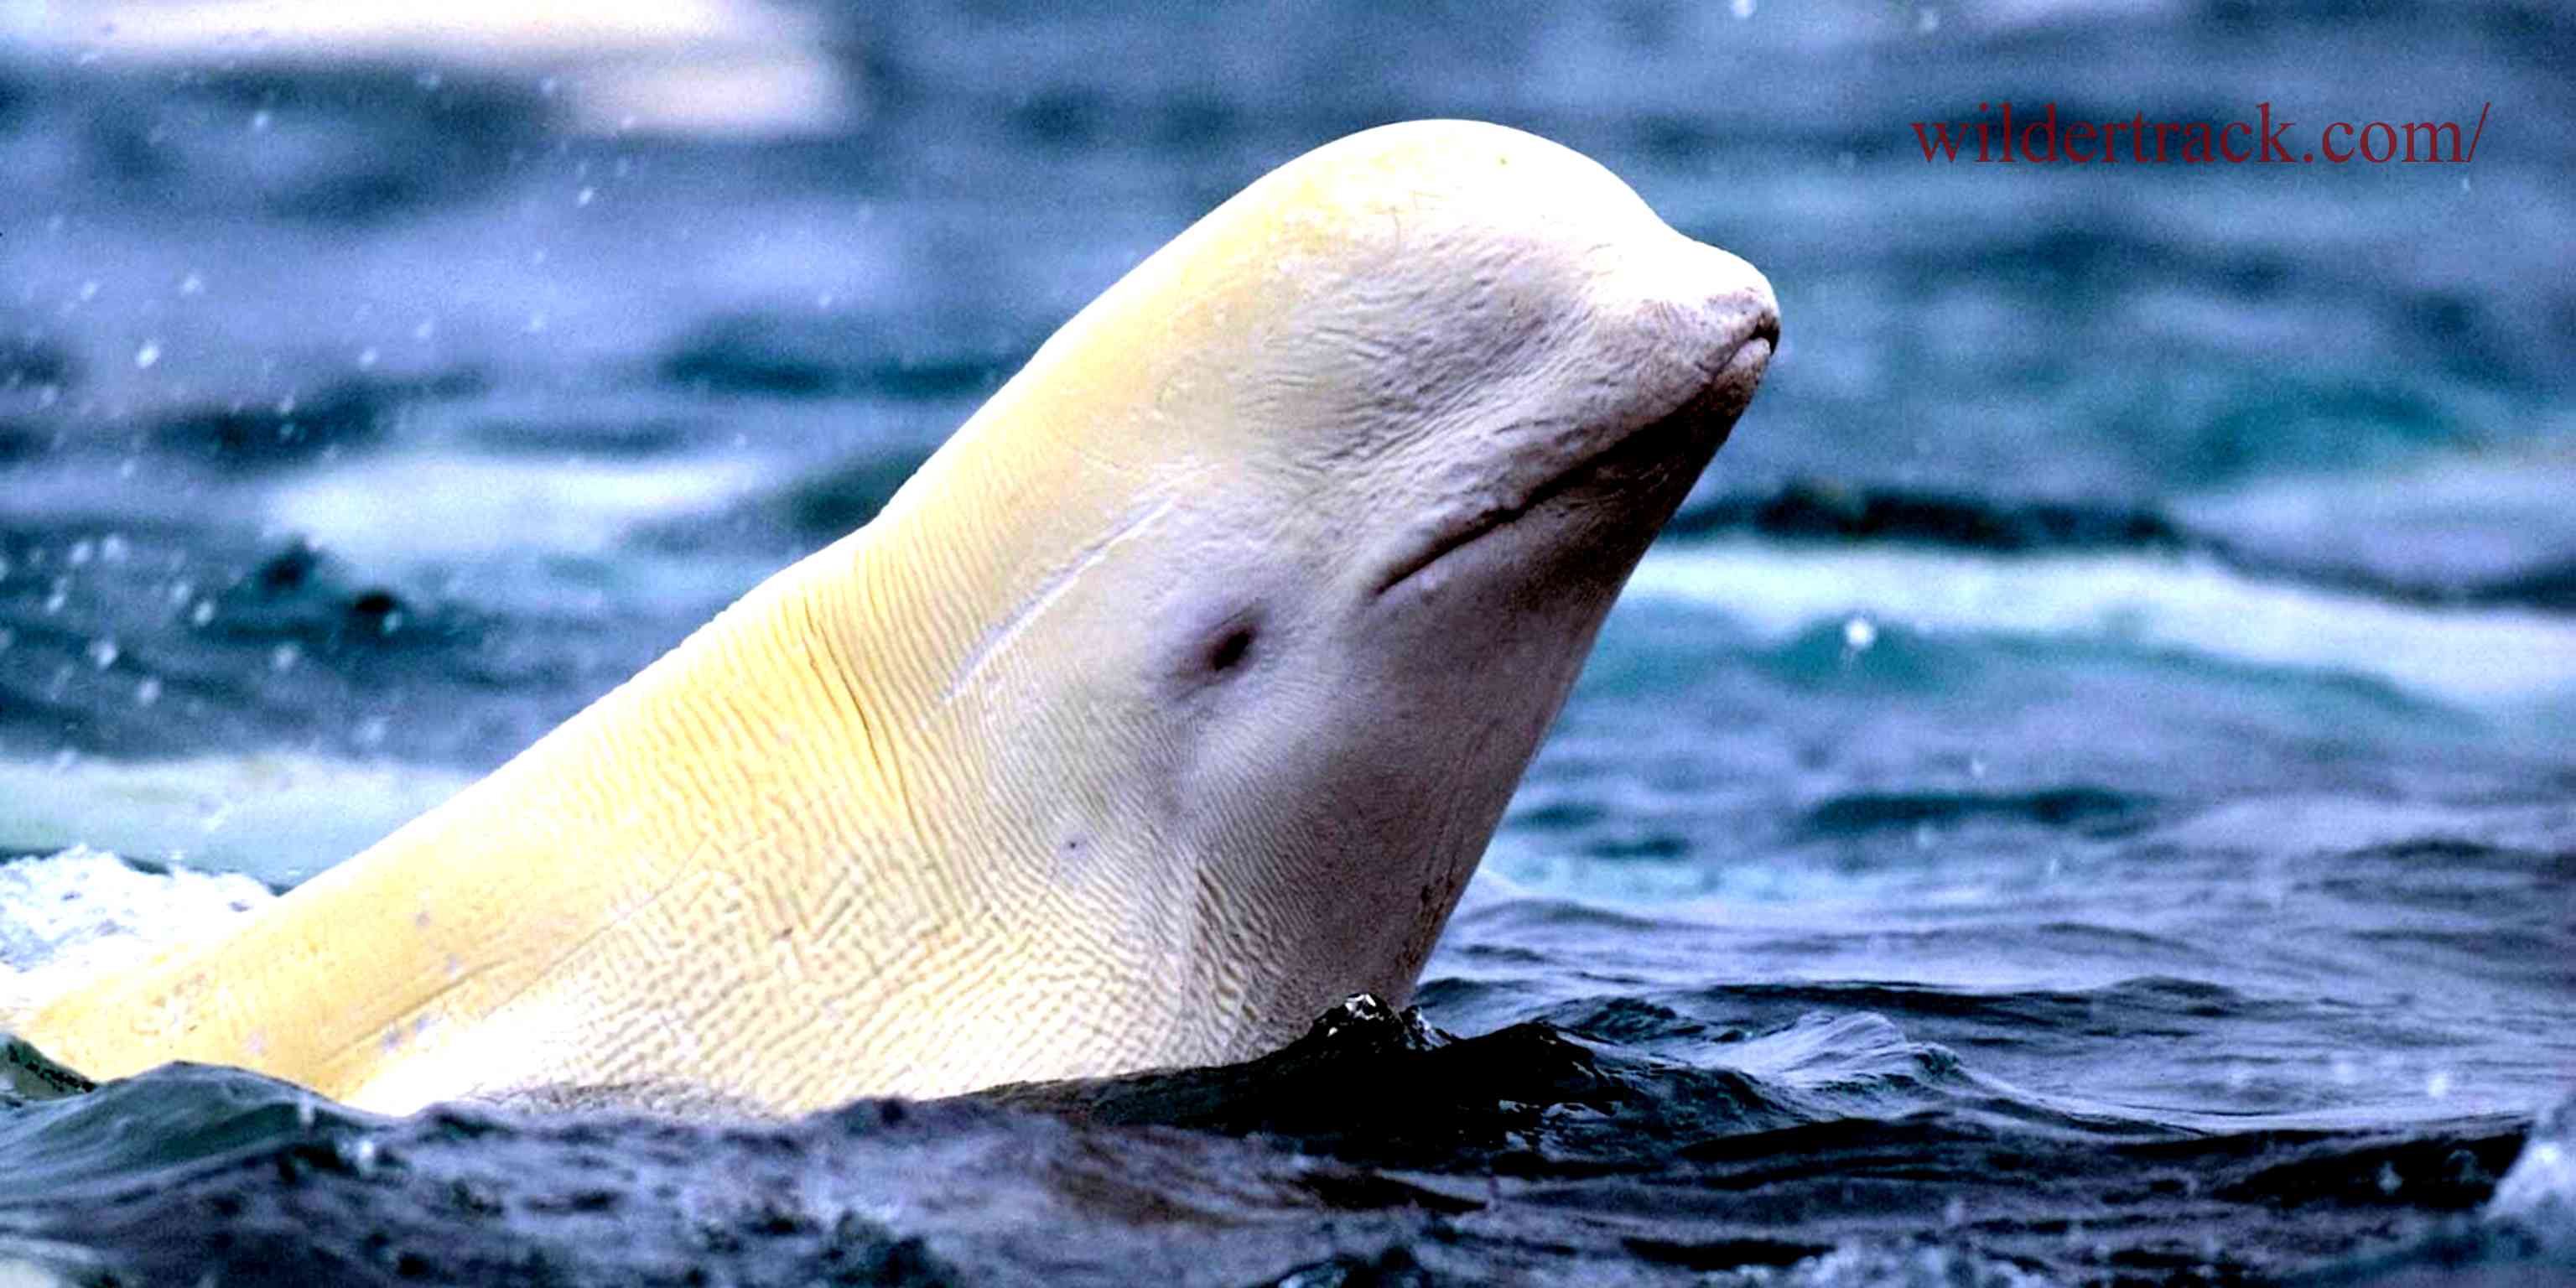 What are Beluga Whales?